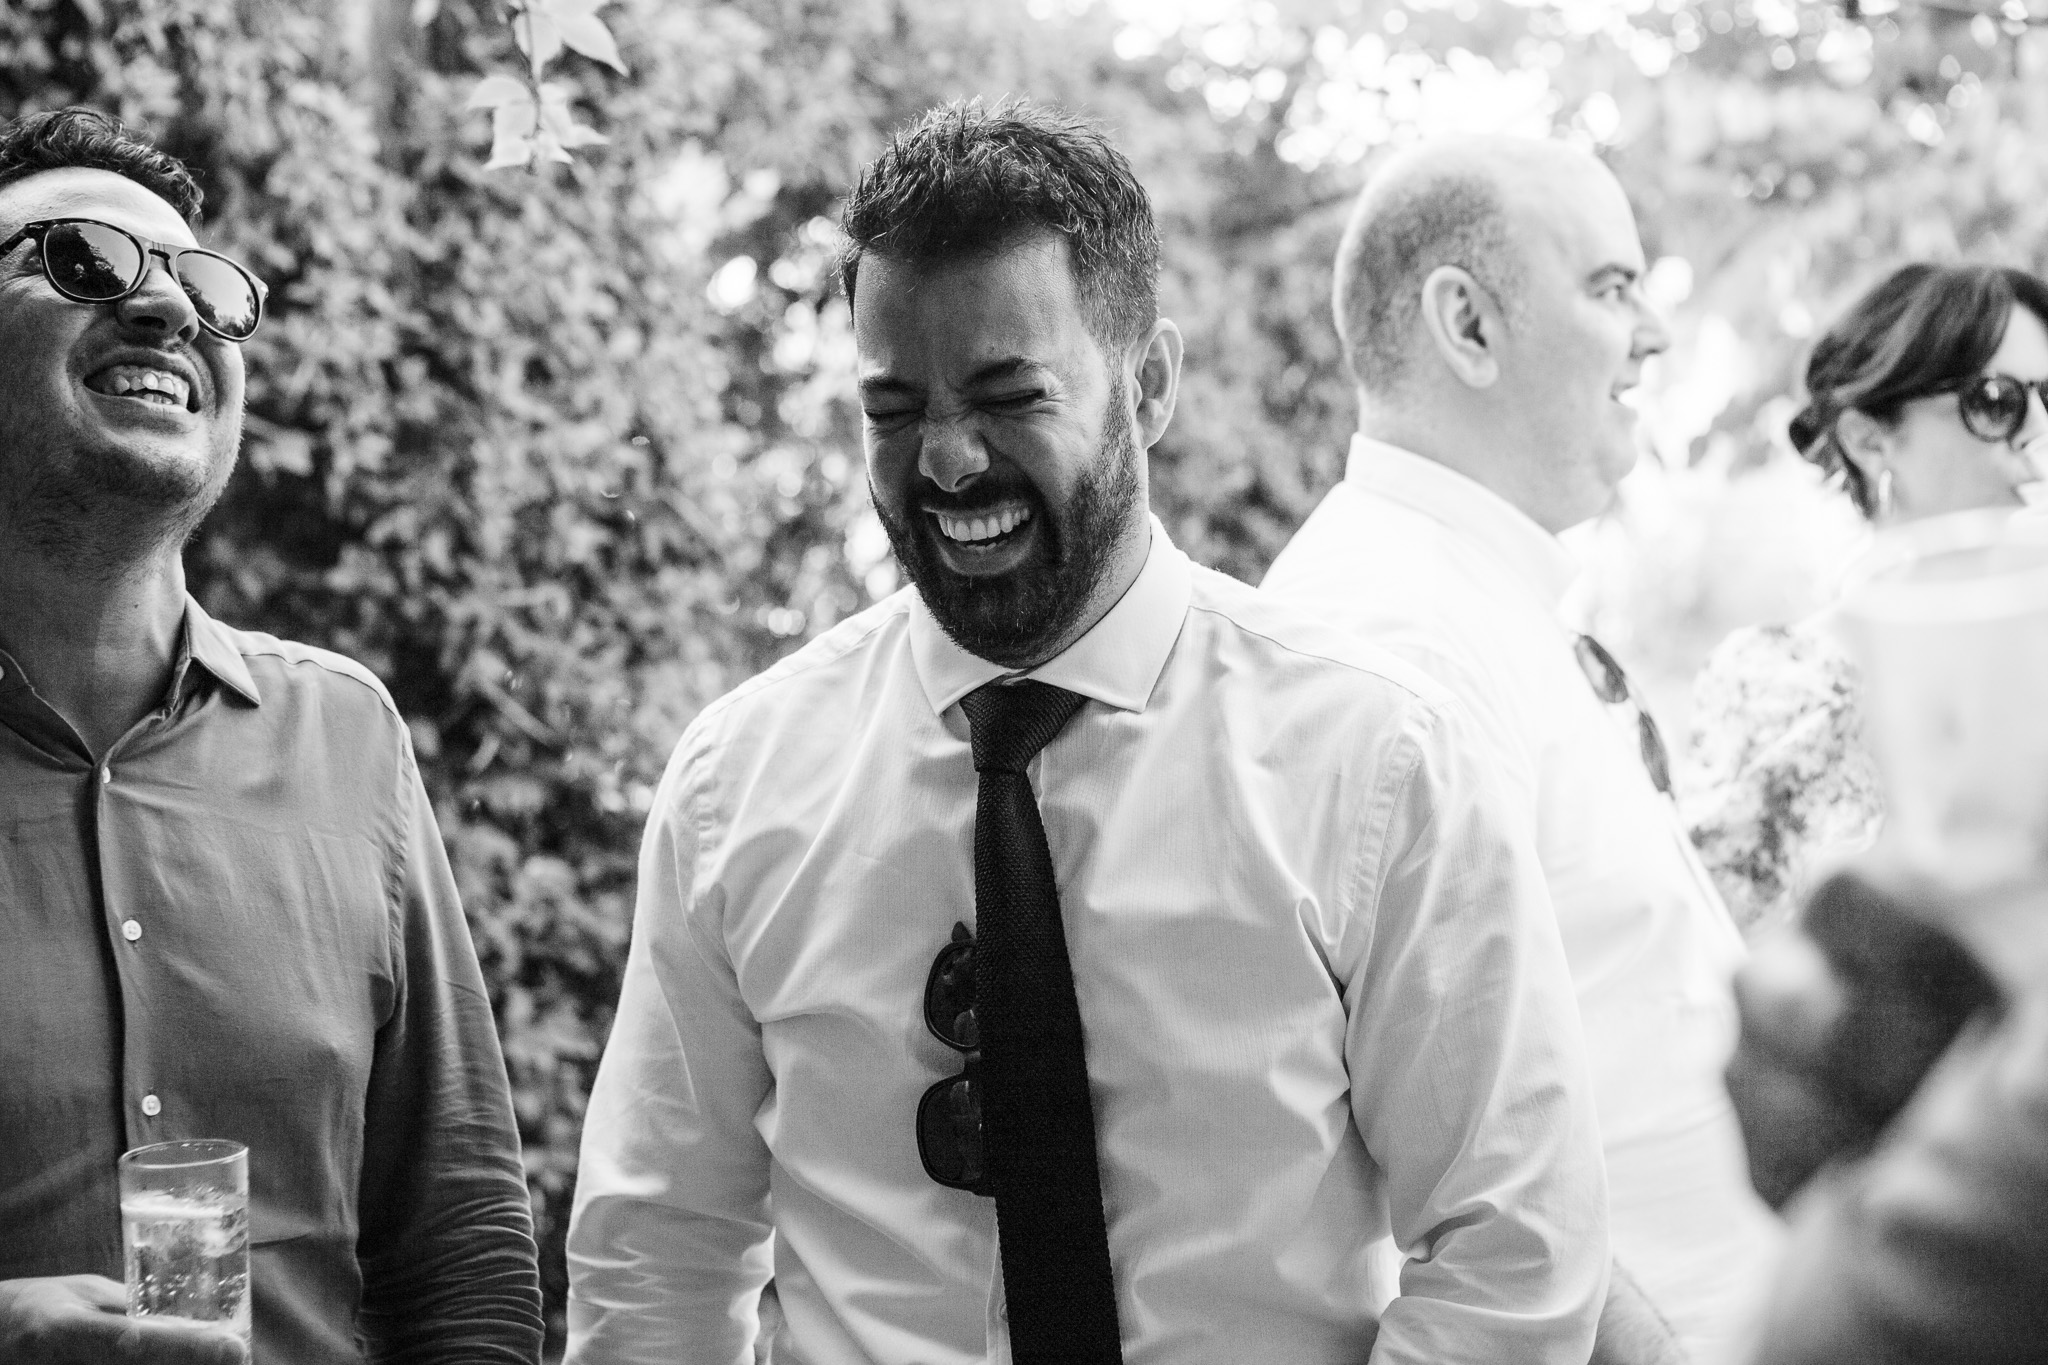 The best man laughs with guests at a wedding reception